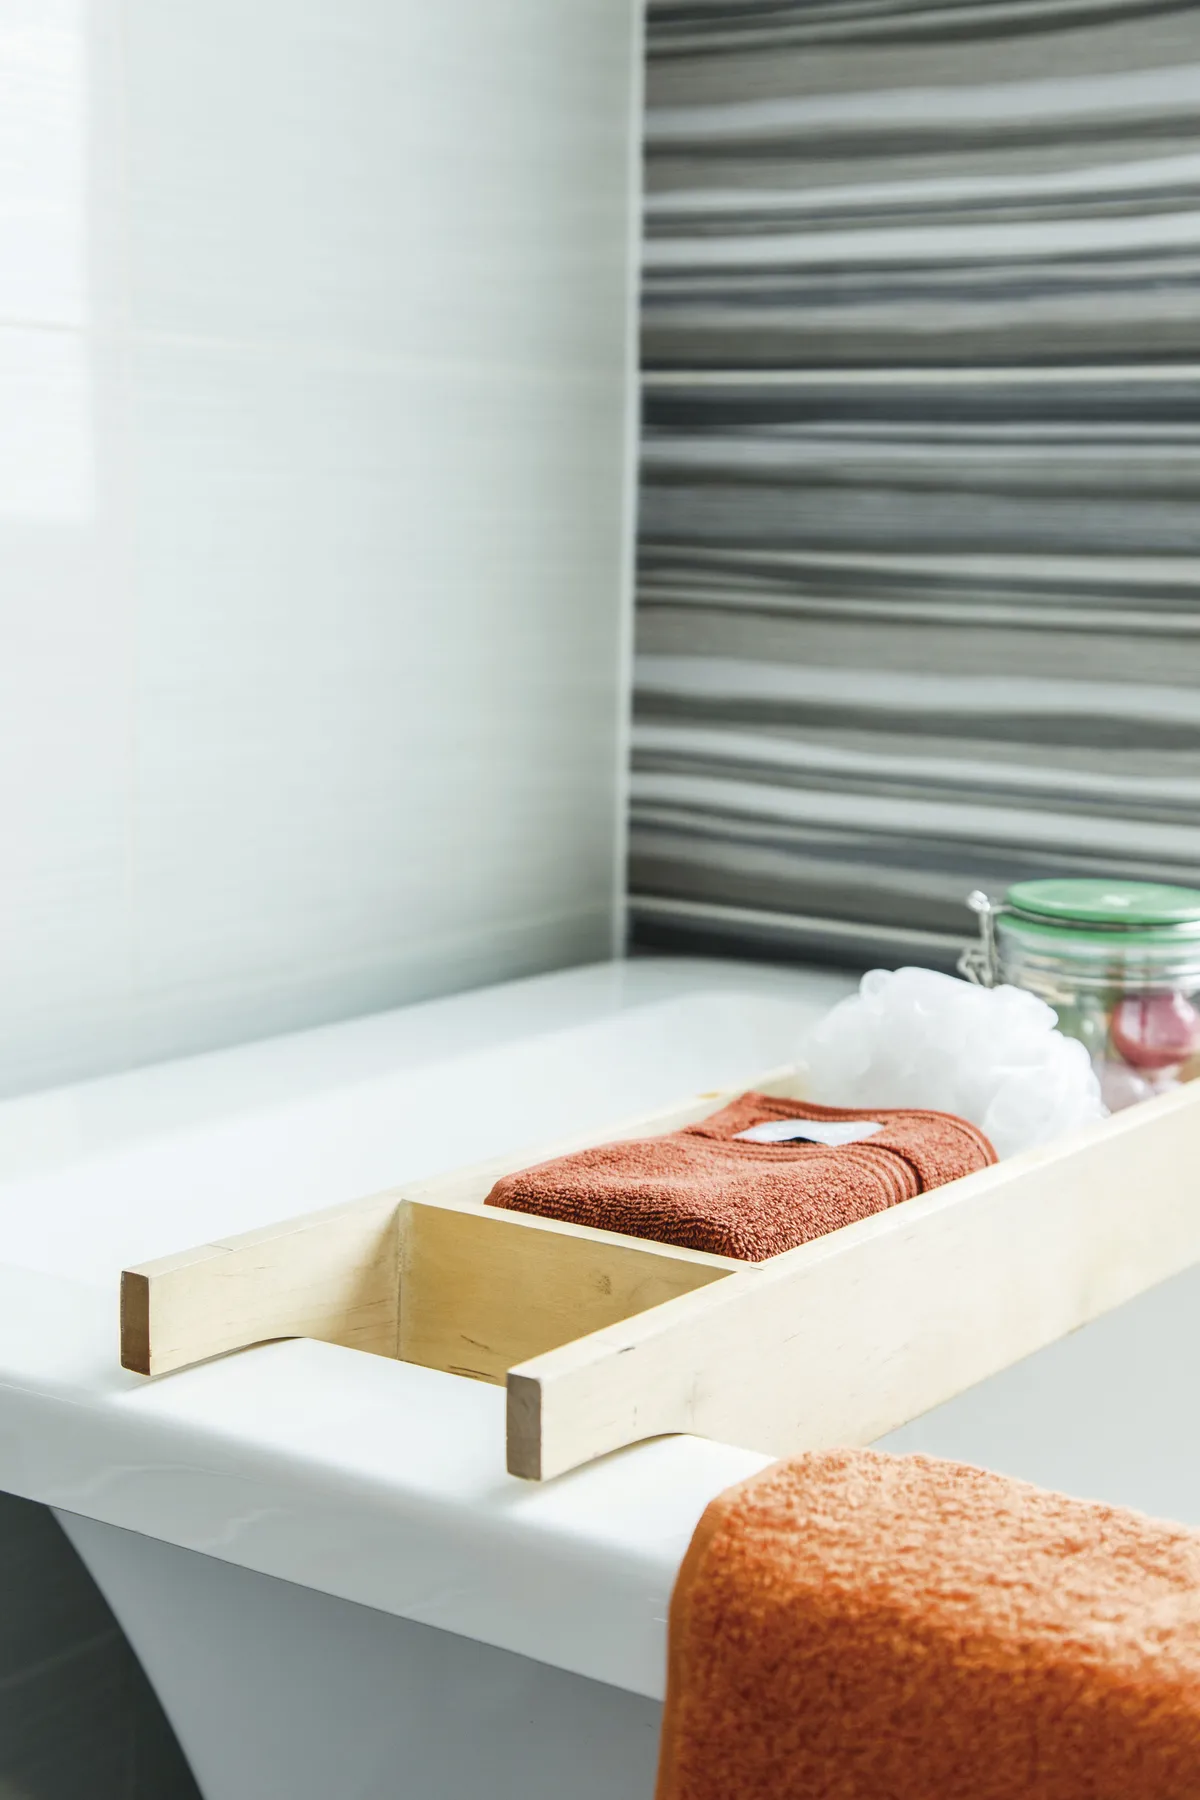 A simple bath rack in blond wood adds practical storage to the bathroom and is perfect for holding some of Teresa’s more decorative accessories